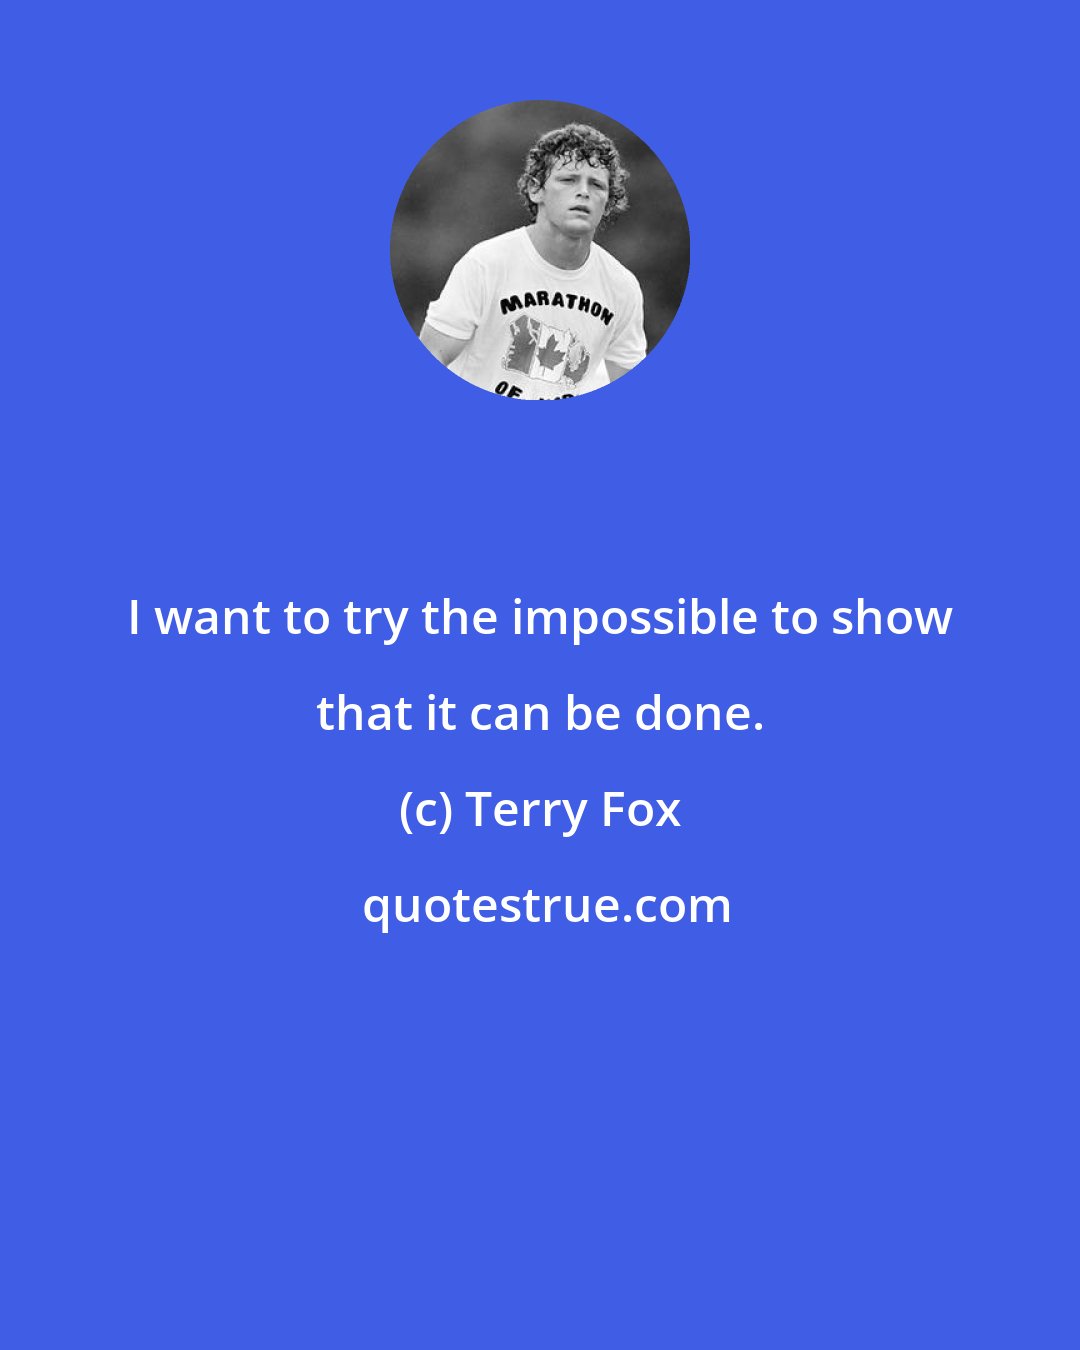 Terry Fox: I want to try the impossible to show that it can be done.